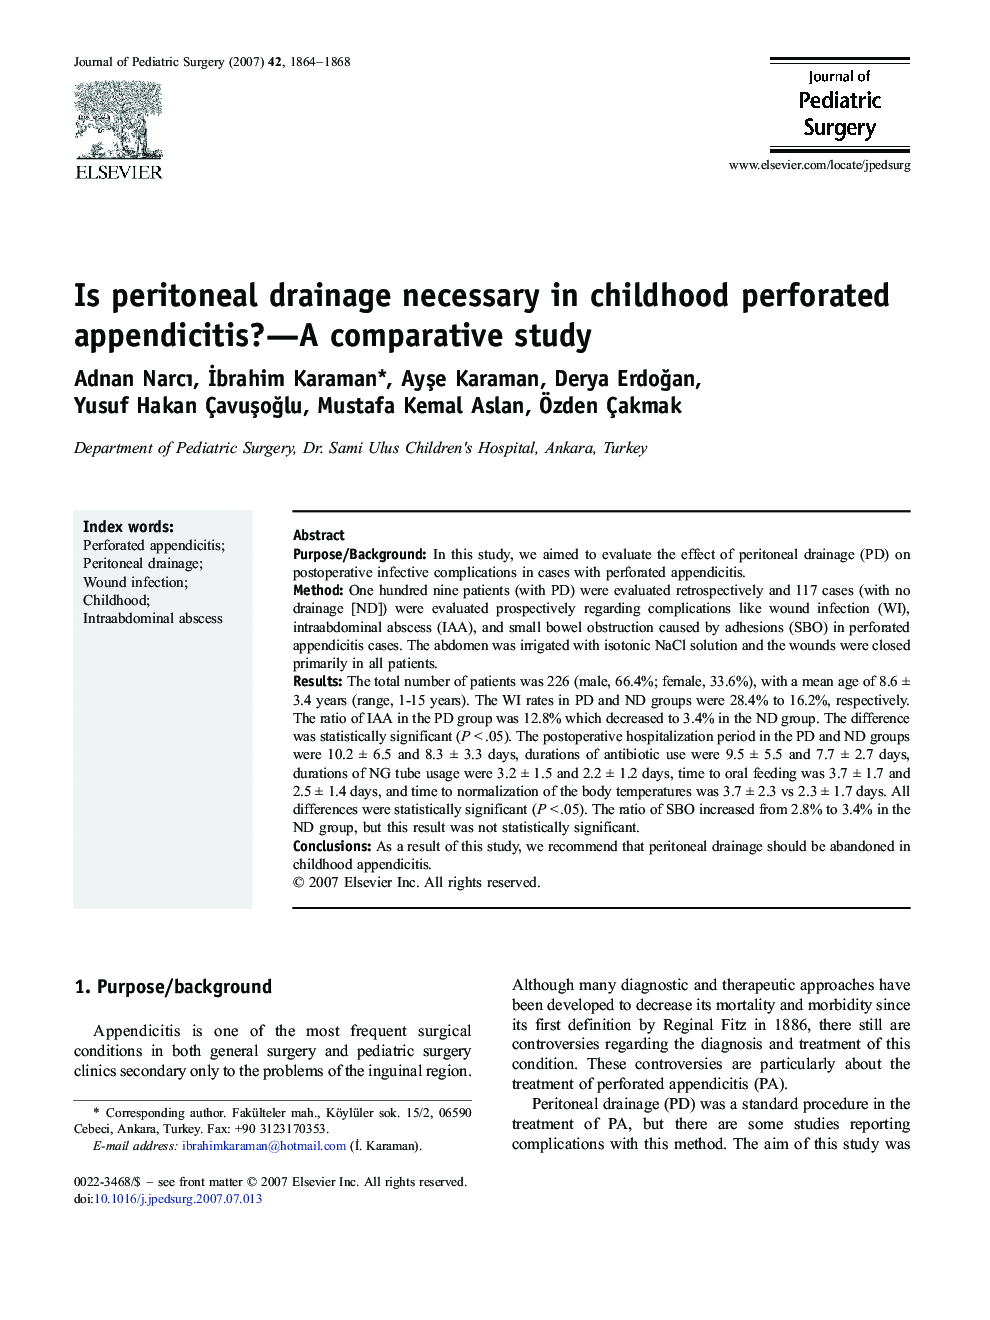 Is peritoneal drainage necessary in childhood perforated appendicitis?—A comparative study